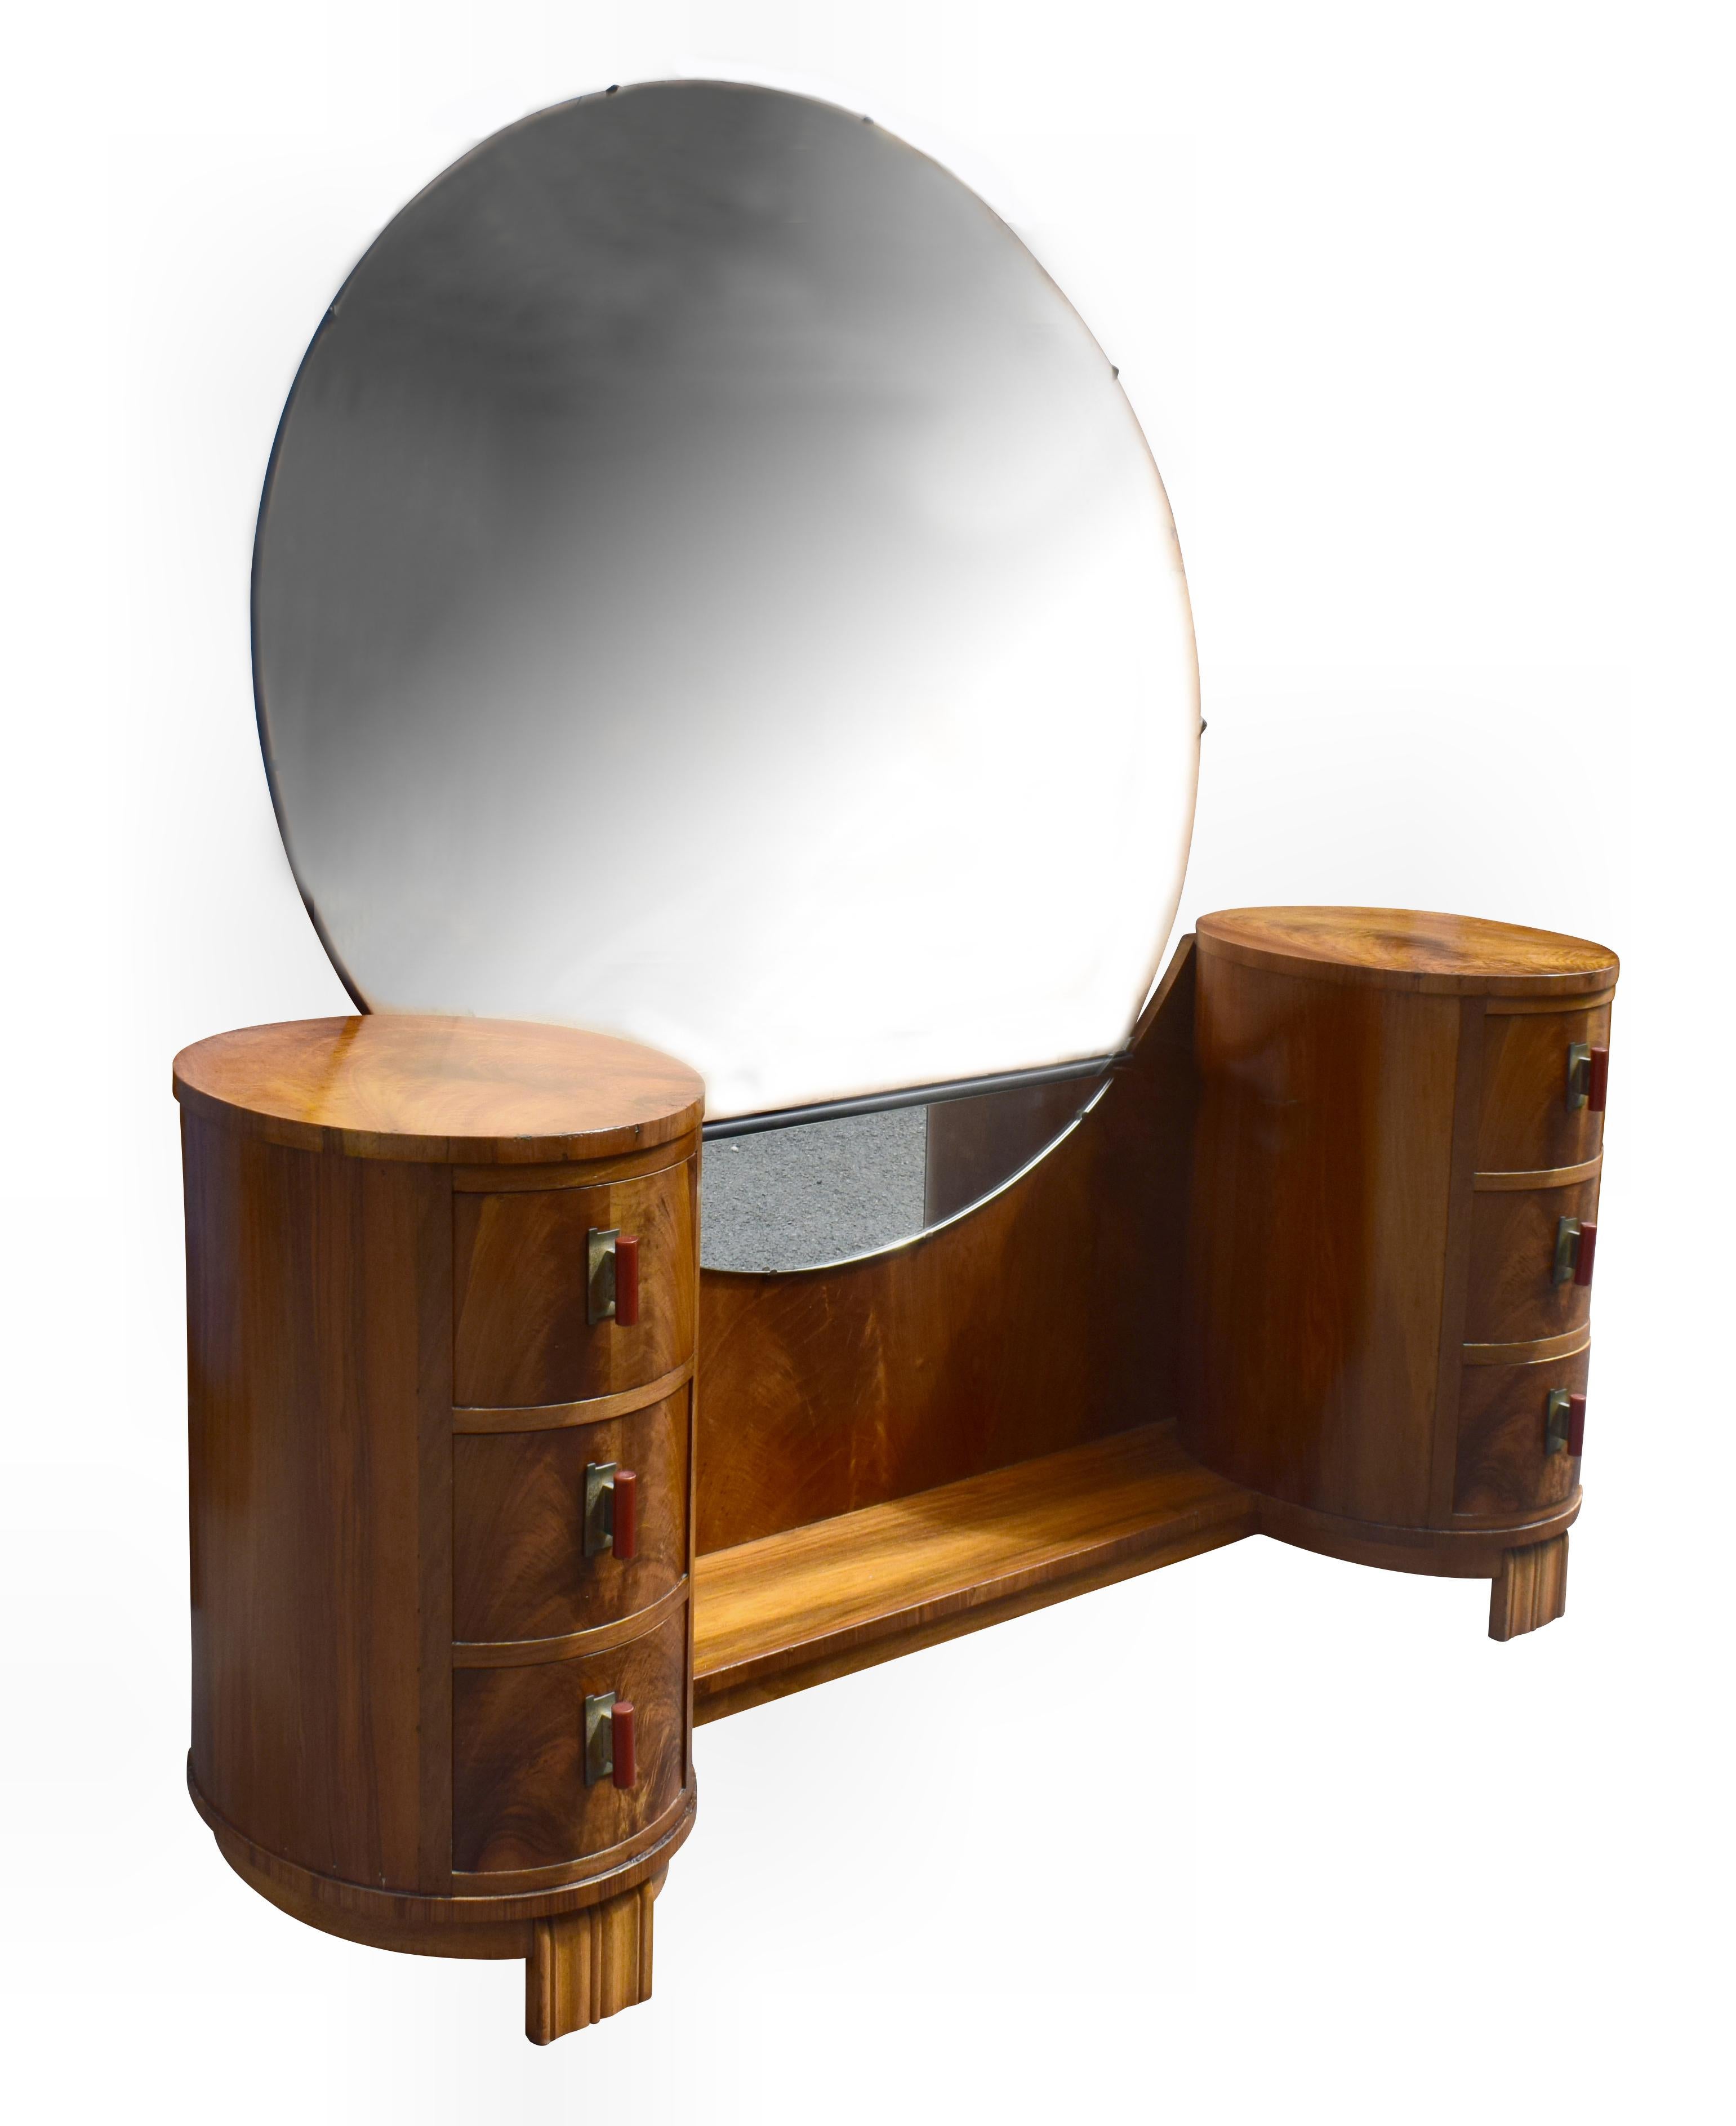 Superb and very high quality 1930s Art Deco dressing table originating from England. This very glamorous dressing table really is a superb piece of furniture in both it's styling and craftsmanship. Features a circular drum shape column either side